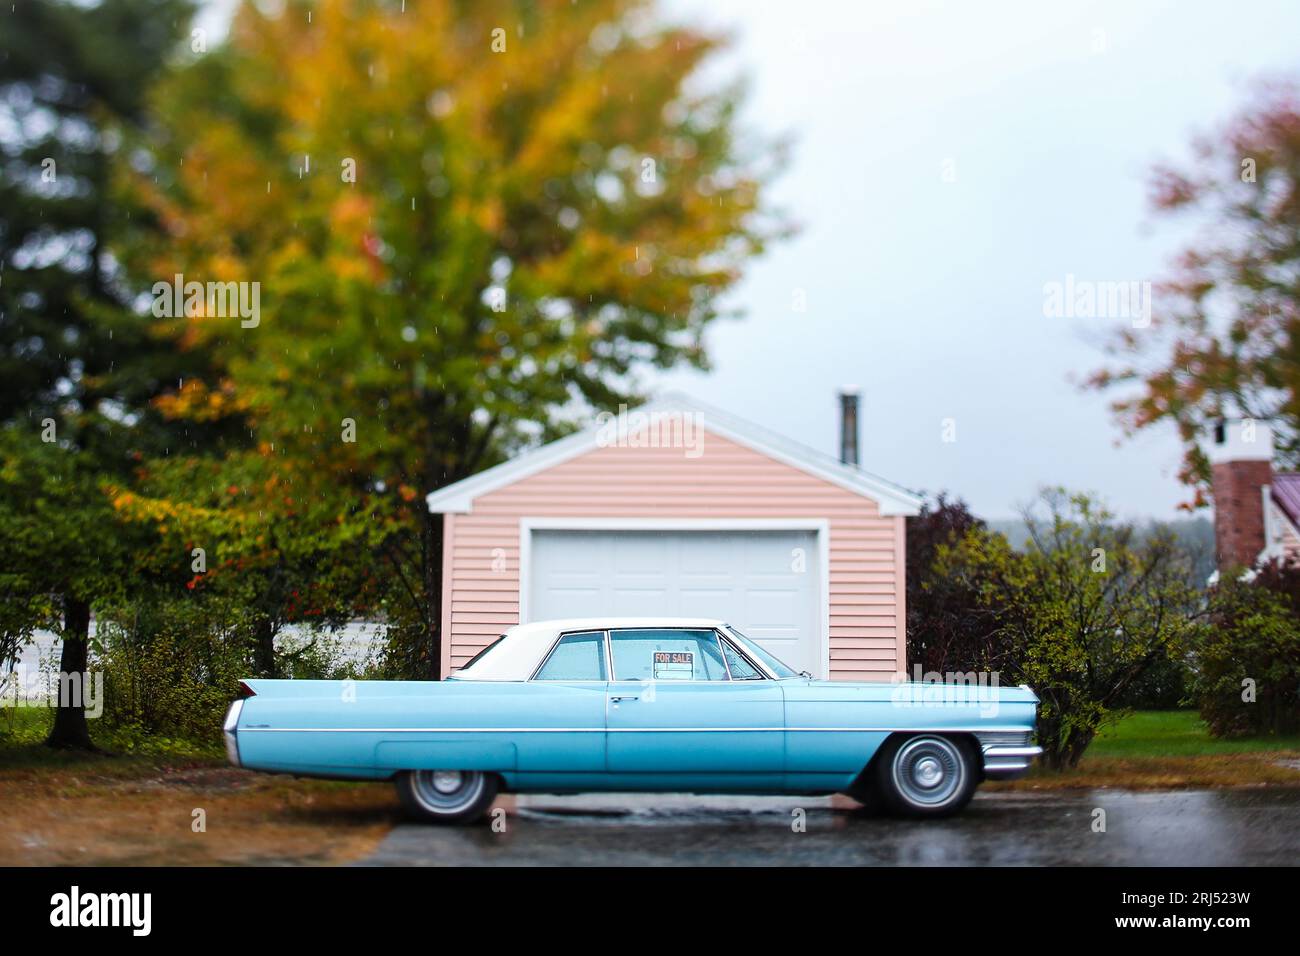 1963 Cadillac Coupe Deville parked in front of garage for sale sign with tilt-shift photography miniature effect General Motors Stock Photo